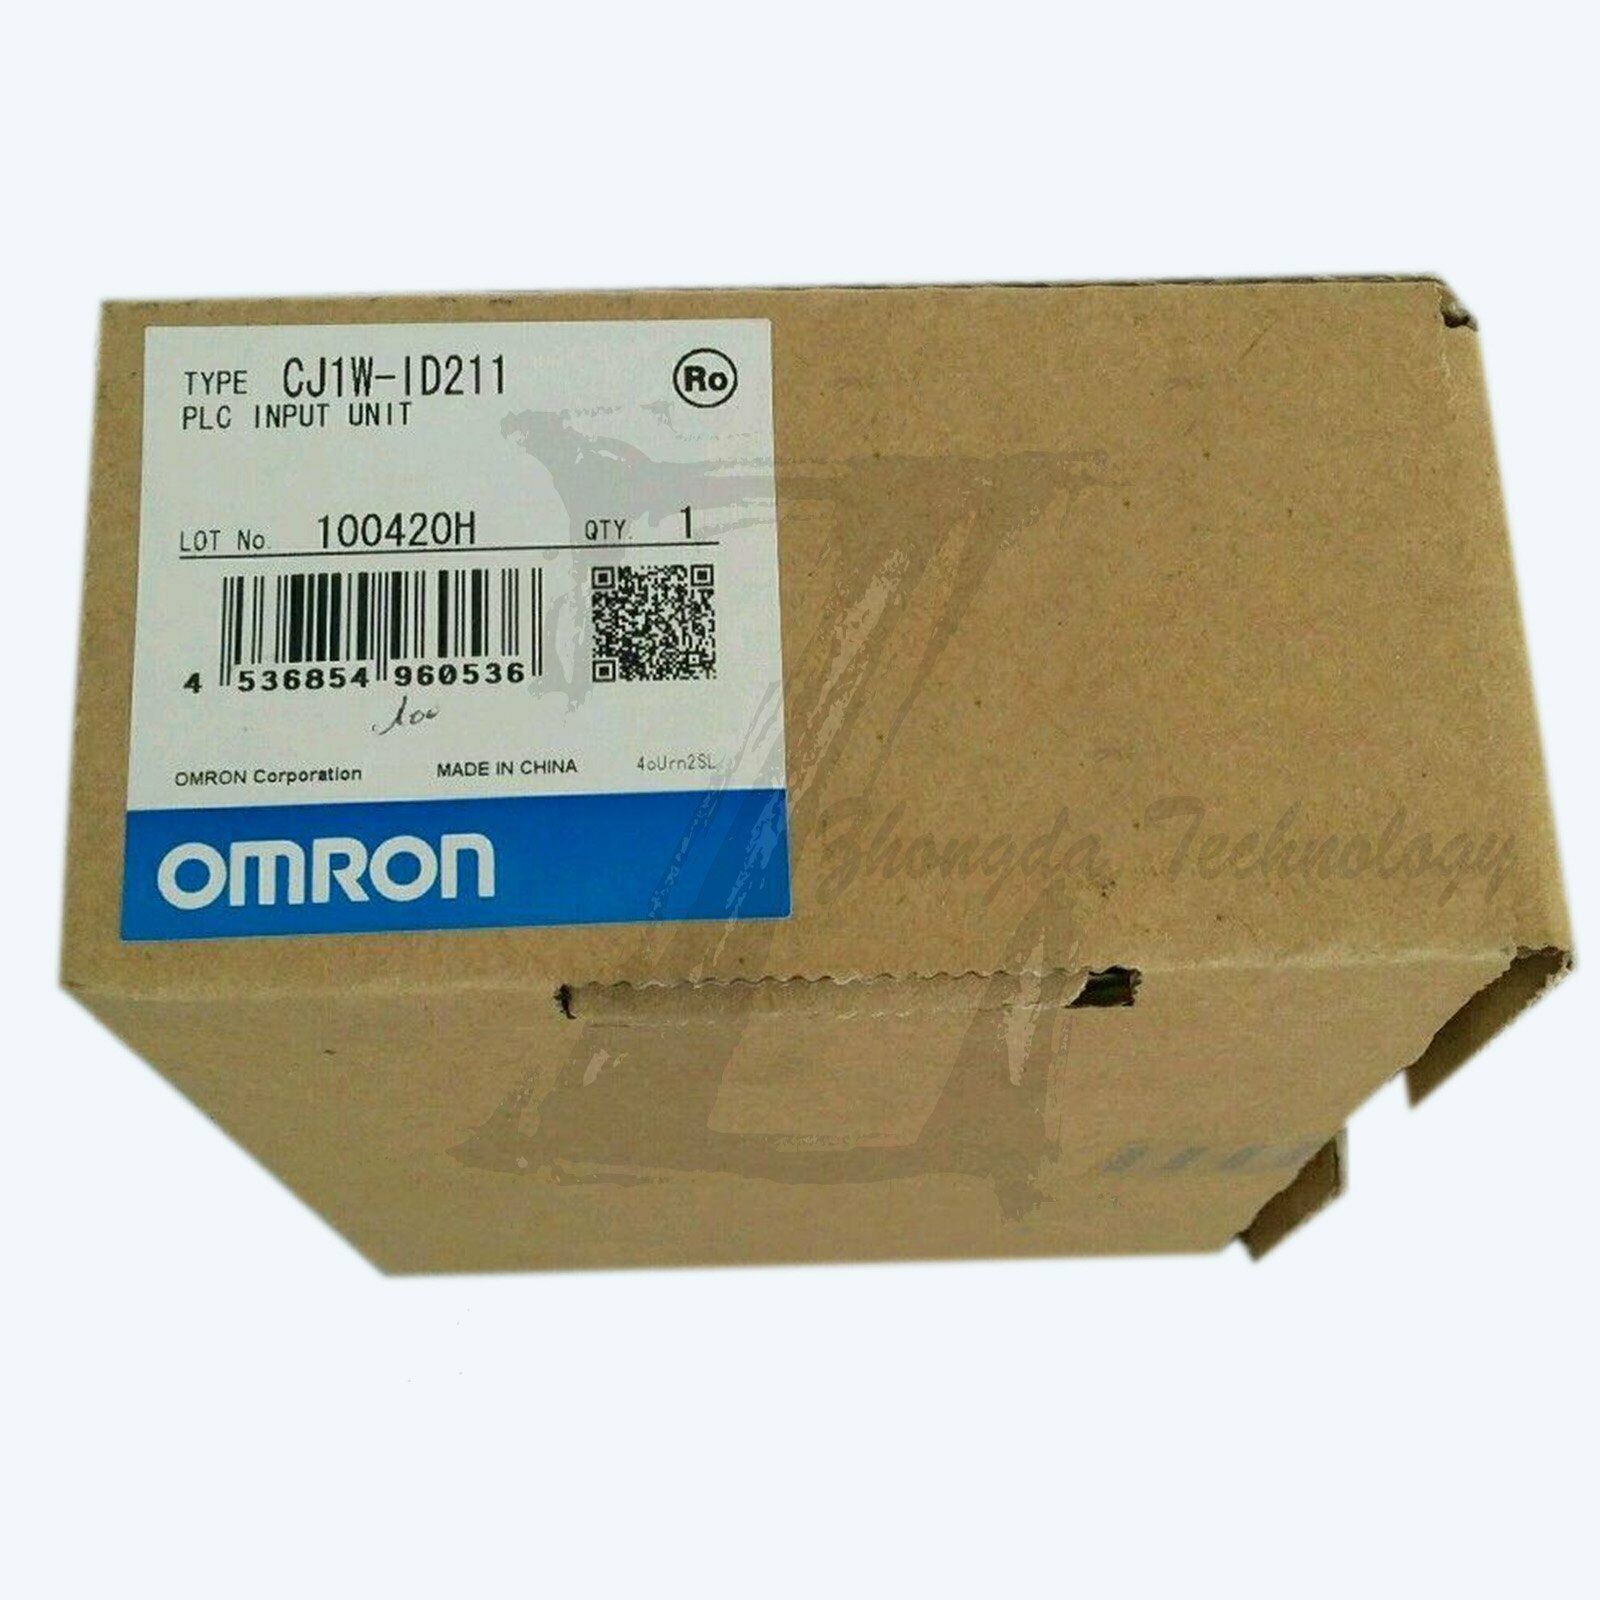 1pc new Omron PLC module CJ1W-ID211 one year warranty KOEED 1, 80%, import_2020_10_10_031751, Omron, Other